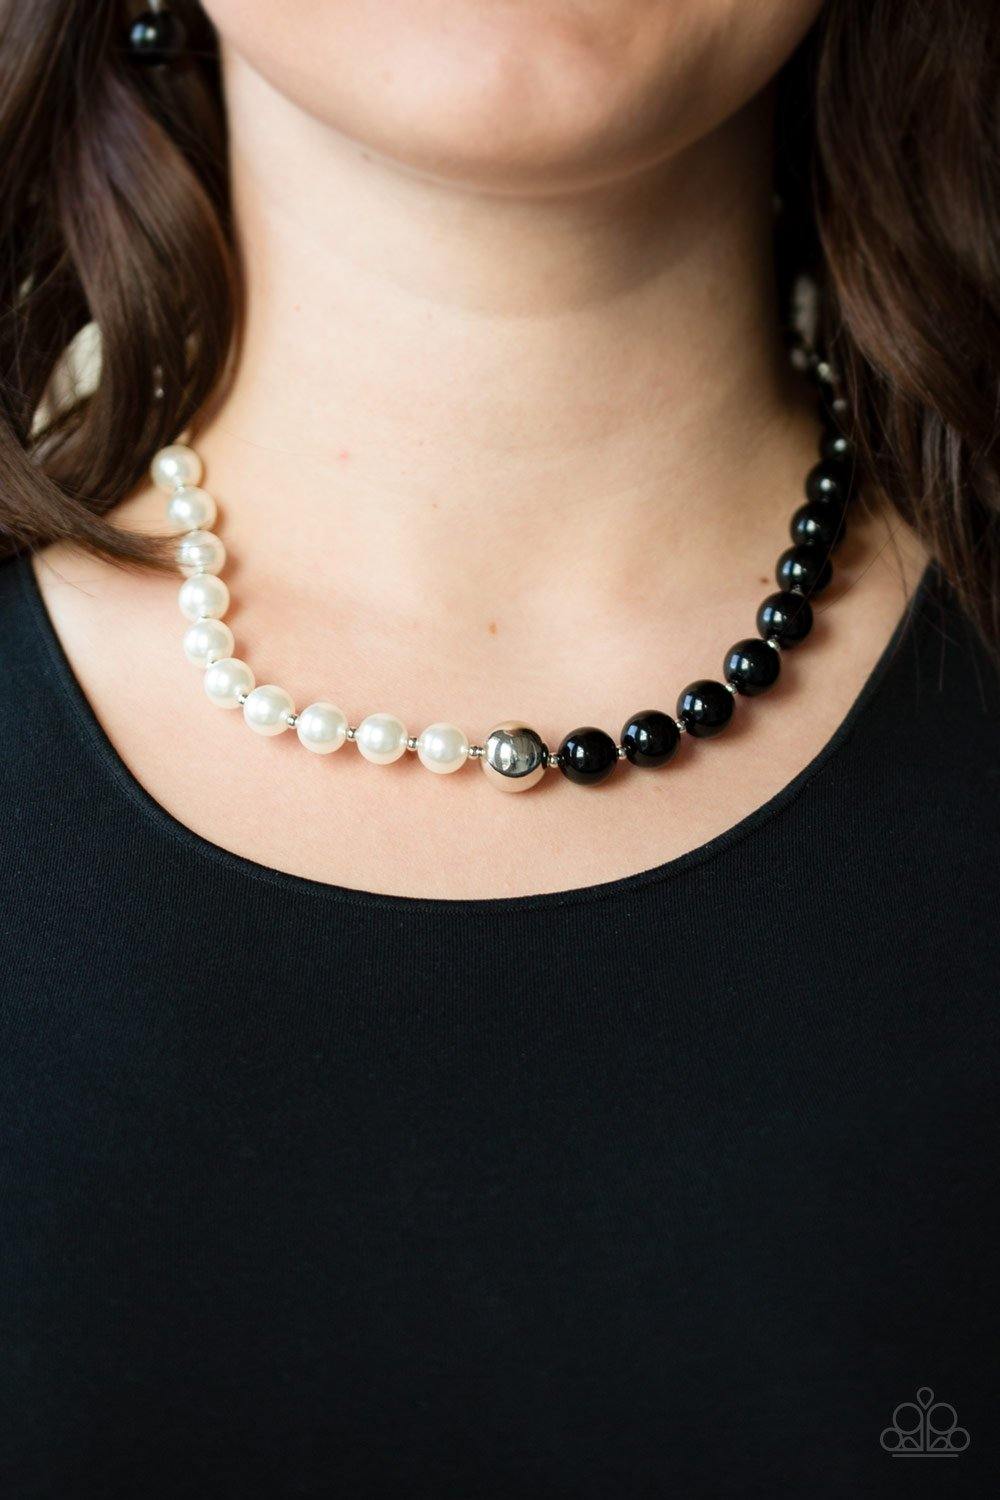 5th Avenue A-Lister Black and White Necklace - Daria's Blings N Things